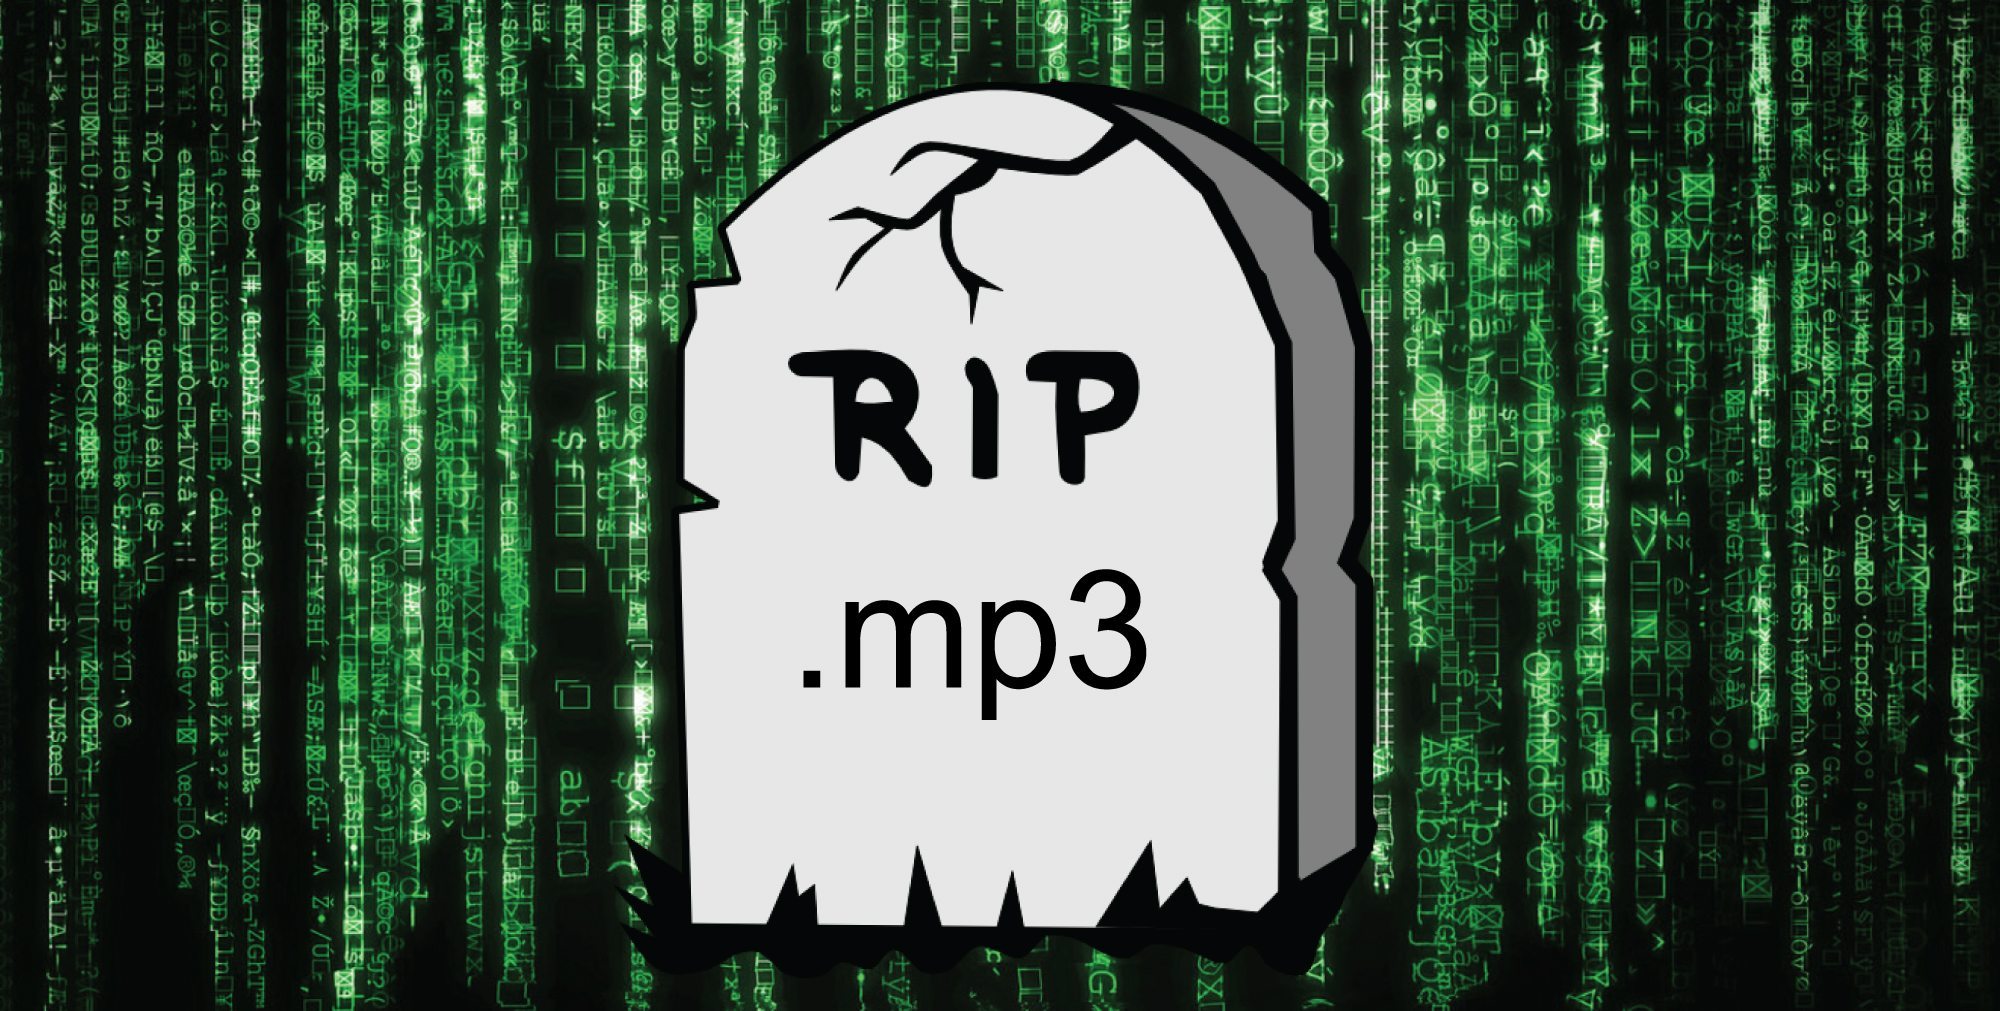 R I P Mp3 The Ubiquitous Digital Audio File Format Is Officially Dead According To Its Creators